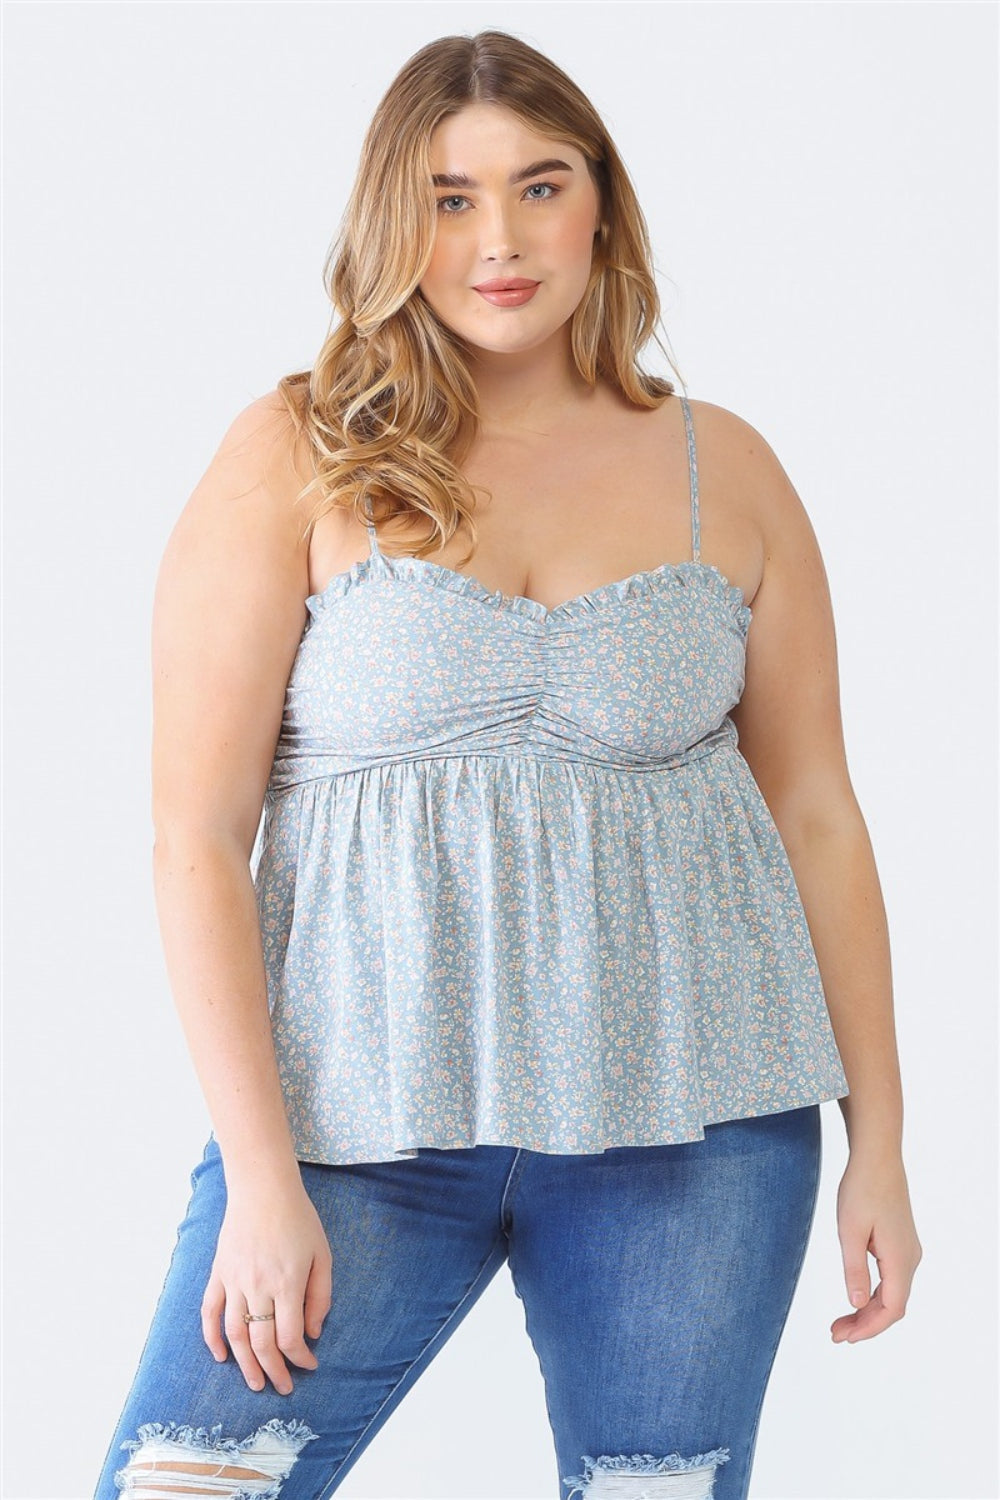 Zenobia Plus Size Frill Smocked Floral Sweetheart Neck Cami - Blue / 1XL - PLUS TOPS - Mixed